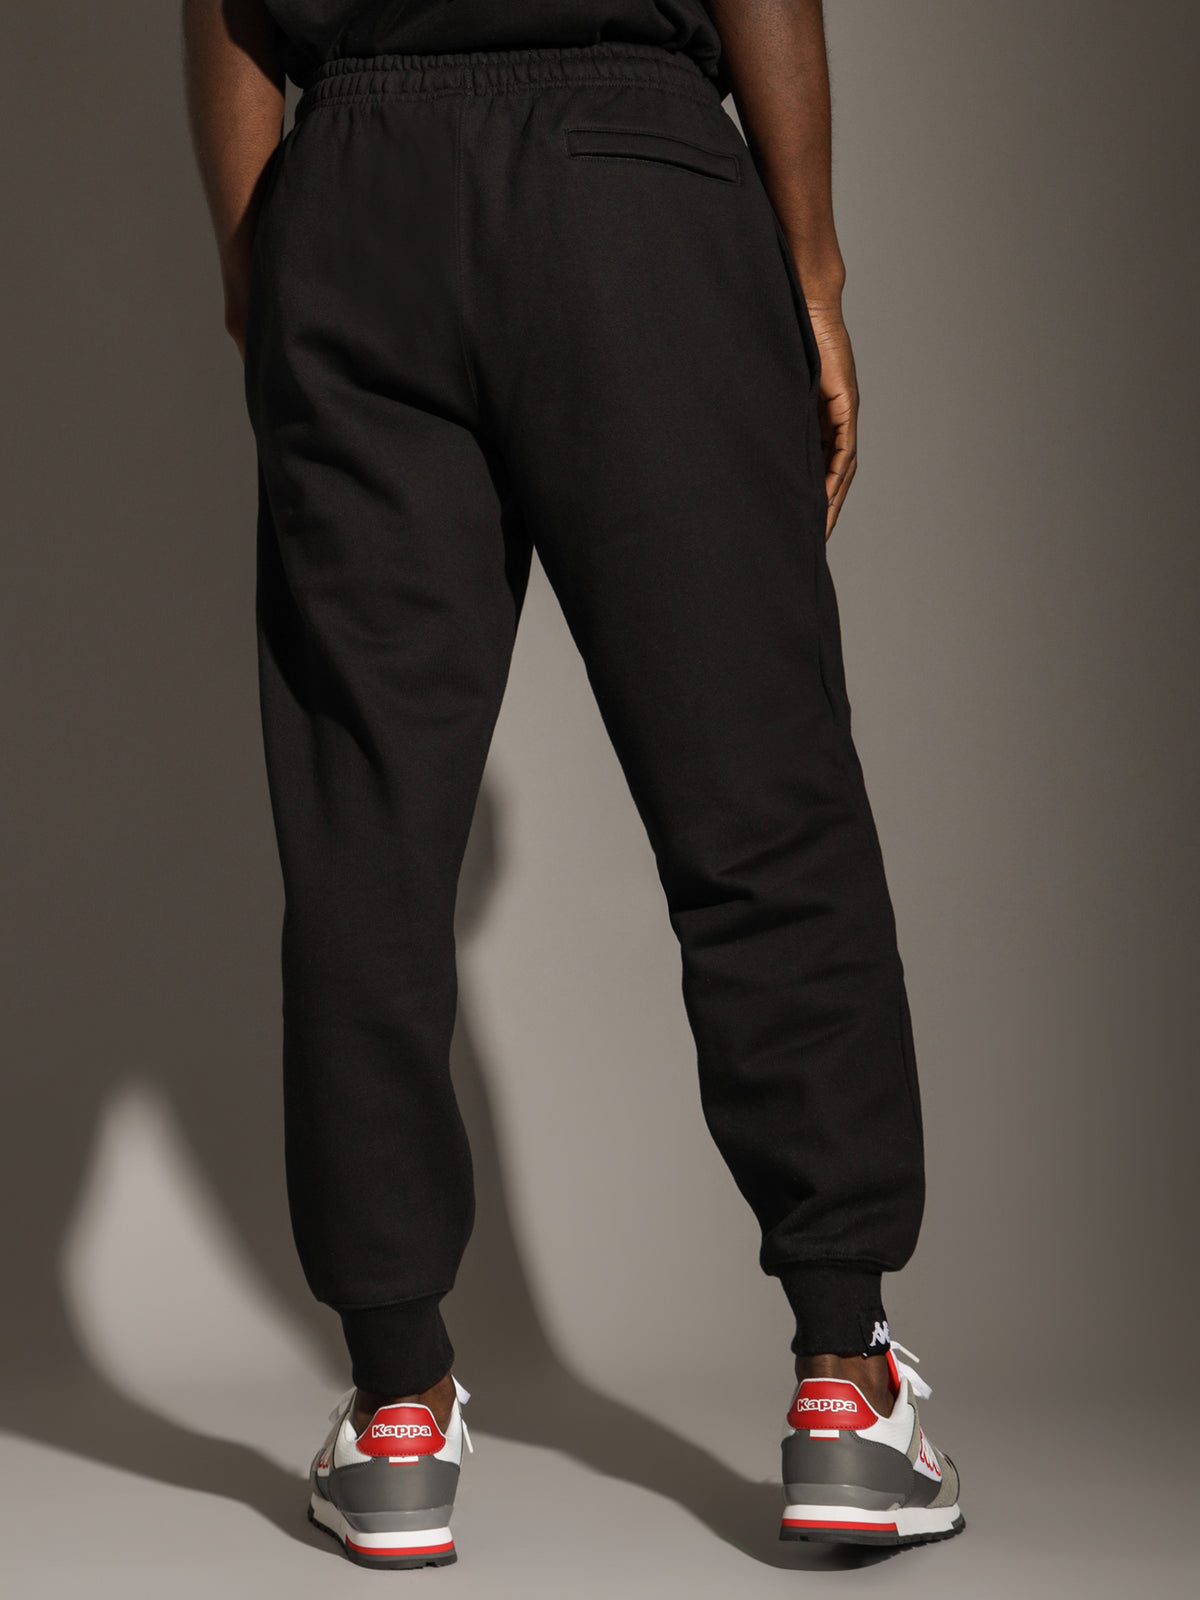 Authentic Scar Track Pants in Black